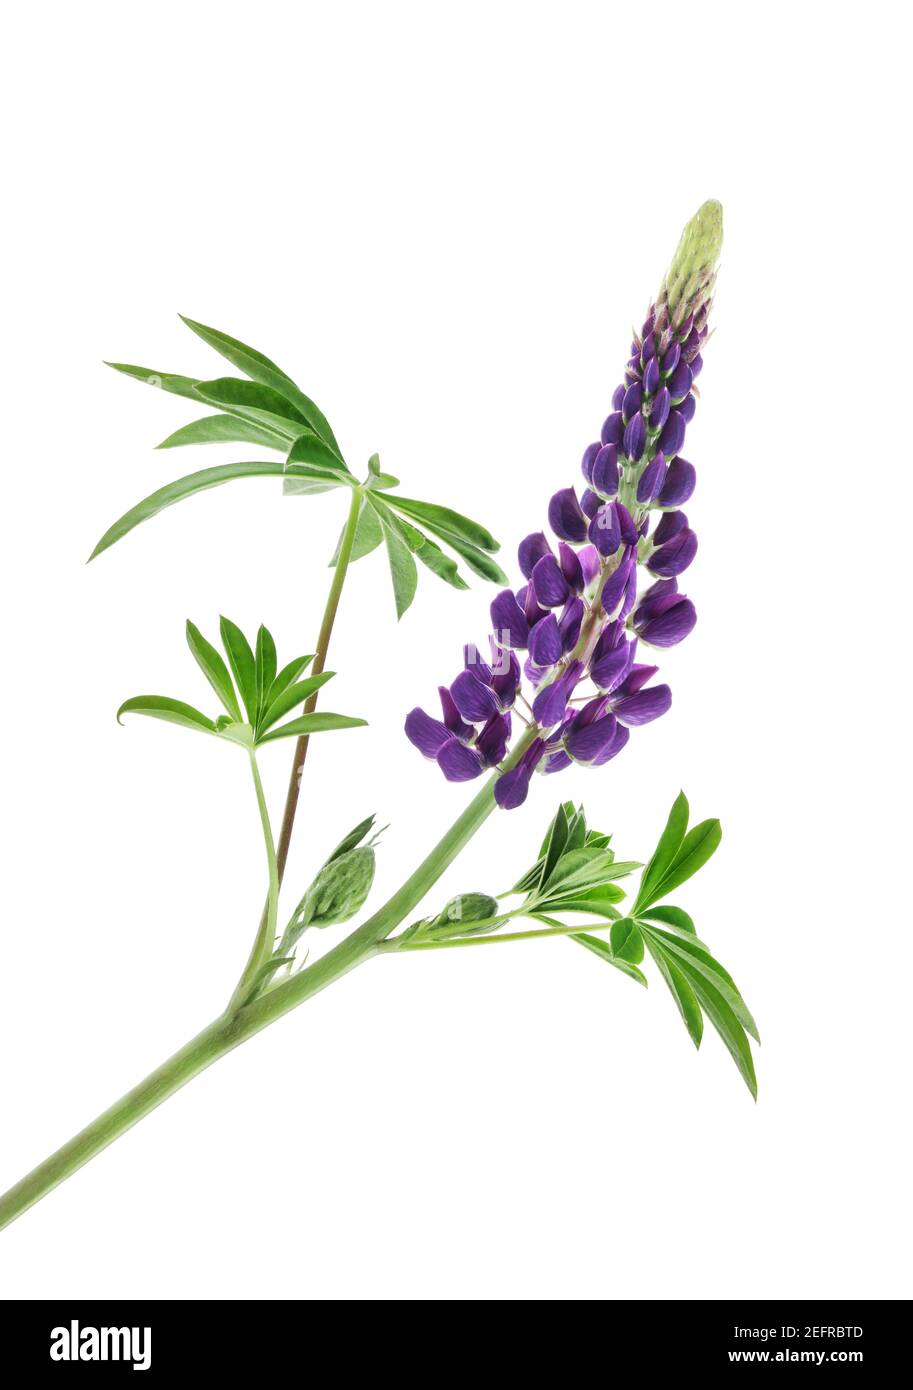 Lupine, Lupinus polyphyllus, artistic closeup of a purple flower with leaves, Gallery Series Blue variety, also known as Bluebonnet, flowering plant. Stock Photo